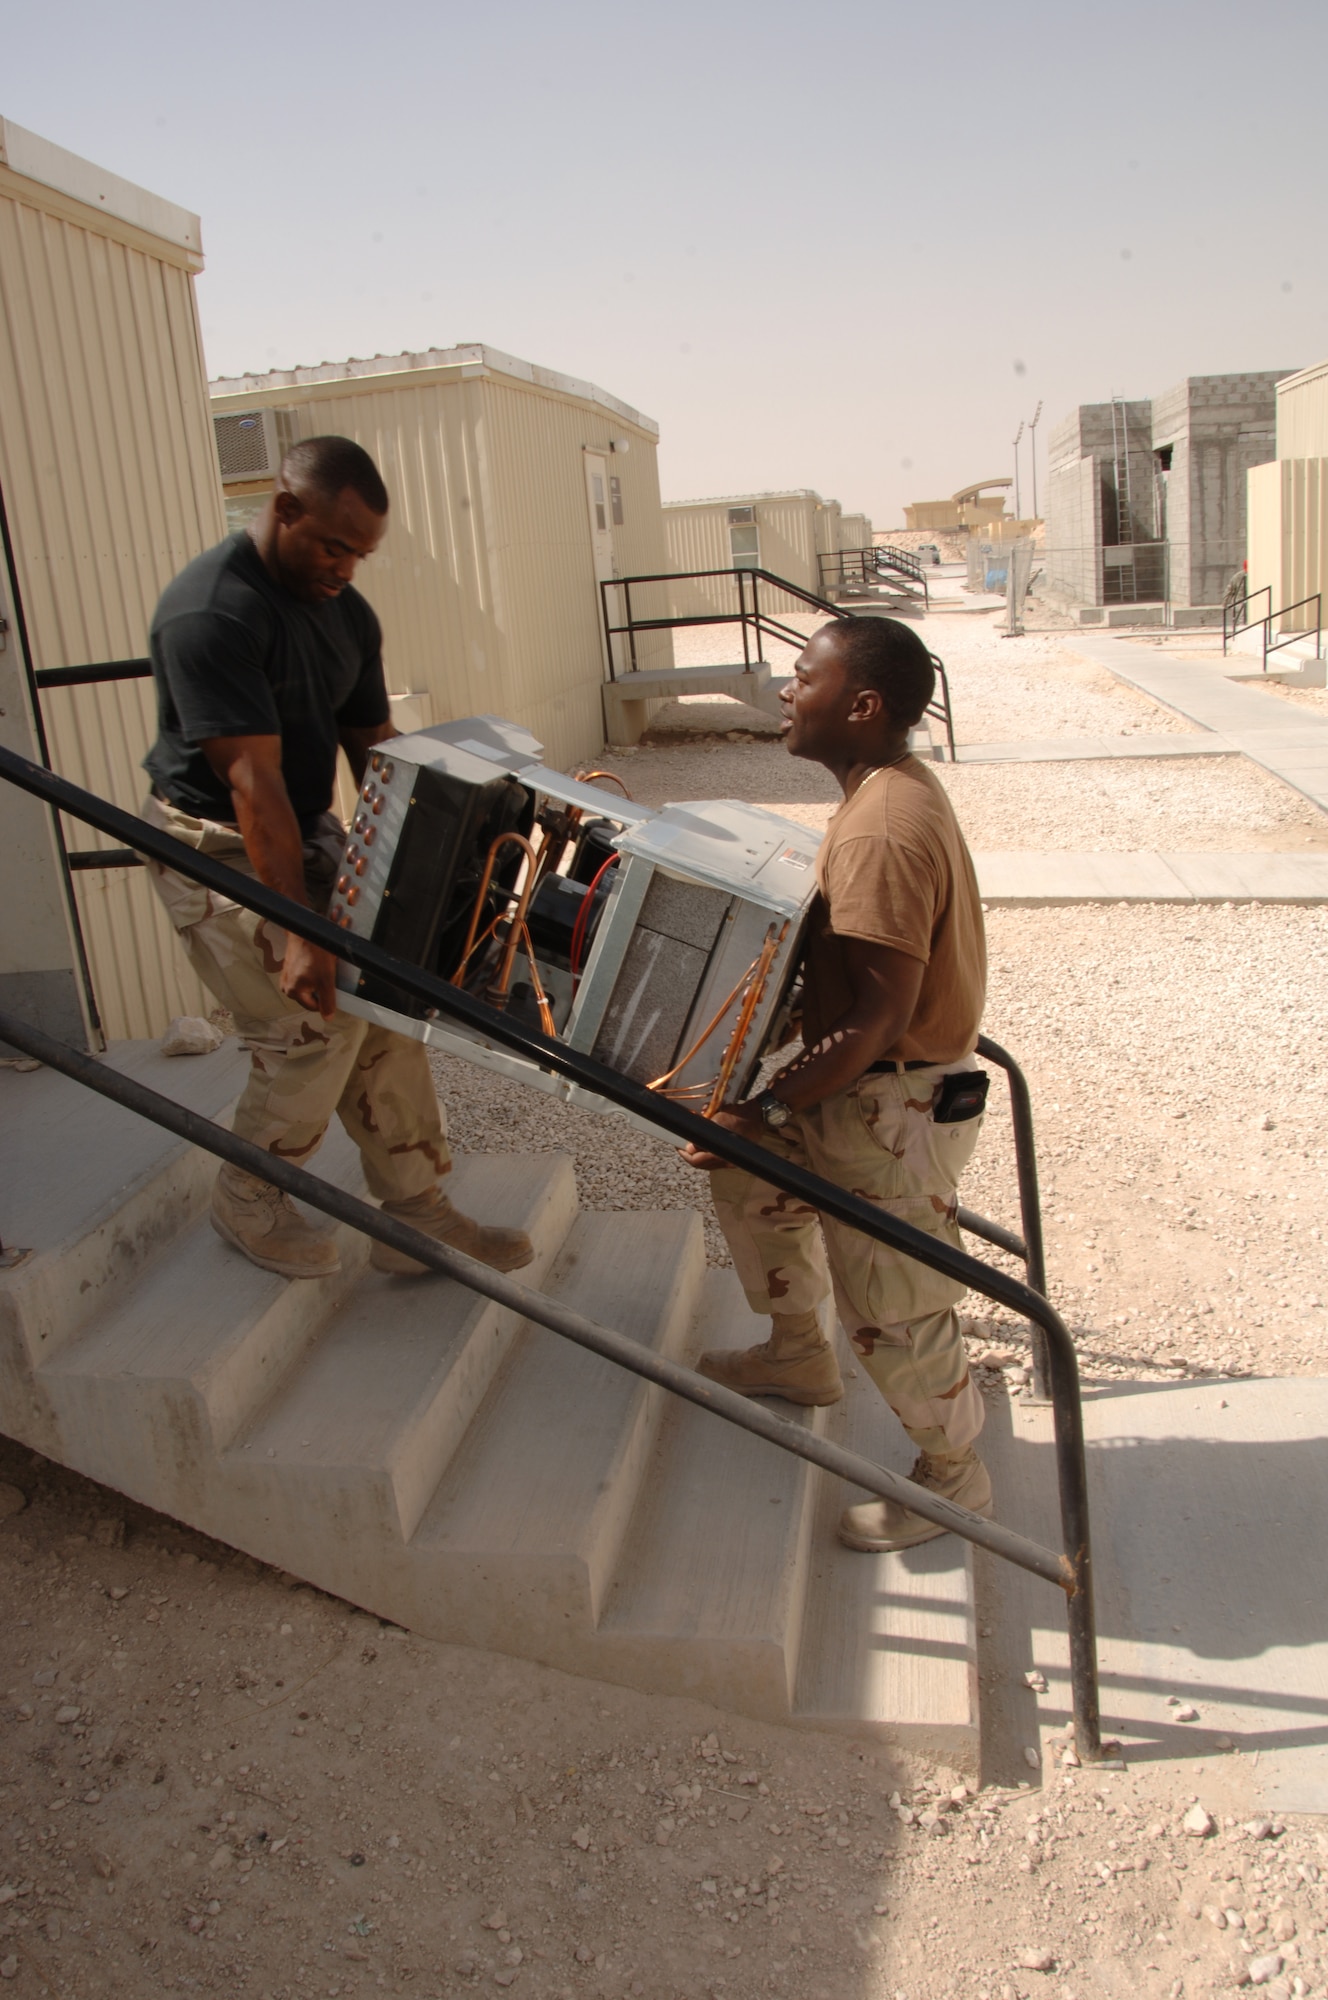 Staff Sgts. Dwayne Carter (left) and Andrew Baines, 379th Expeditionary Civil Engineer Squadron heating, ventilation and air conditioning technicians, carry a new air conditioning unit to be installed in a dormitory. Sergeant Carter, deployed from Ramstein Air Base, Germany, and Sergeant Baines, deployed from Andrews Air Force Base, Md., perform the semiannual preventive maintenance procedure on window air conditioning units throughout coalition compound to prevent dorm fires. (U.S. Air Force photo/Senior Airman Tong Duong)